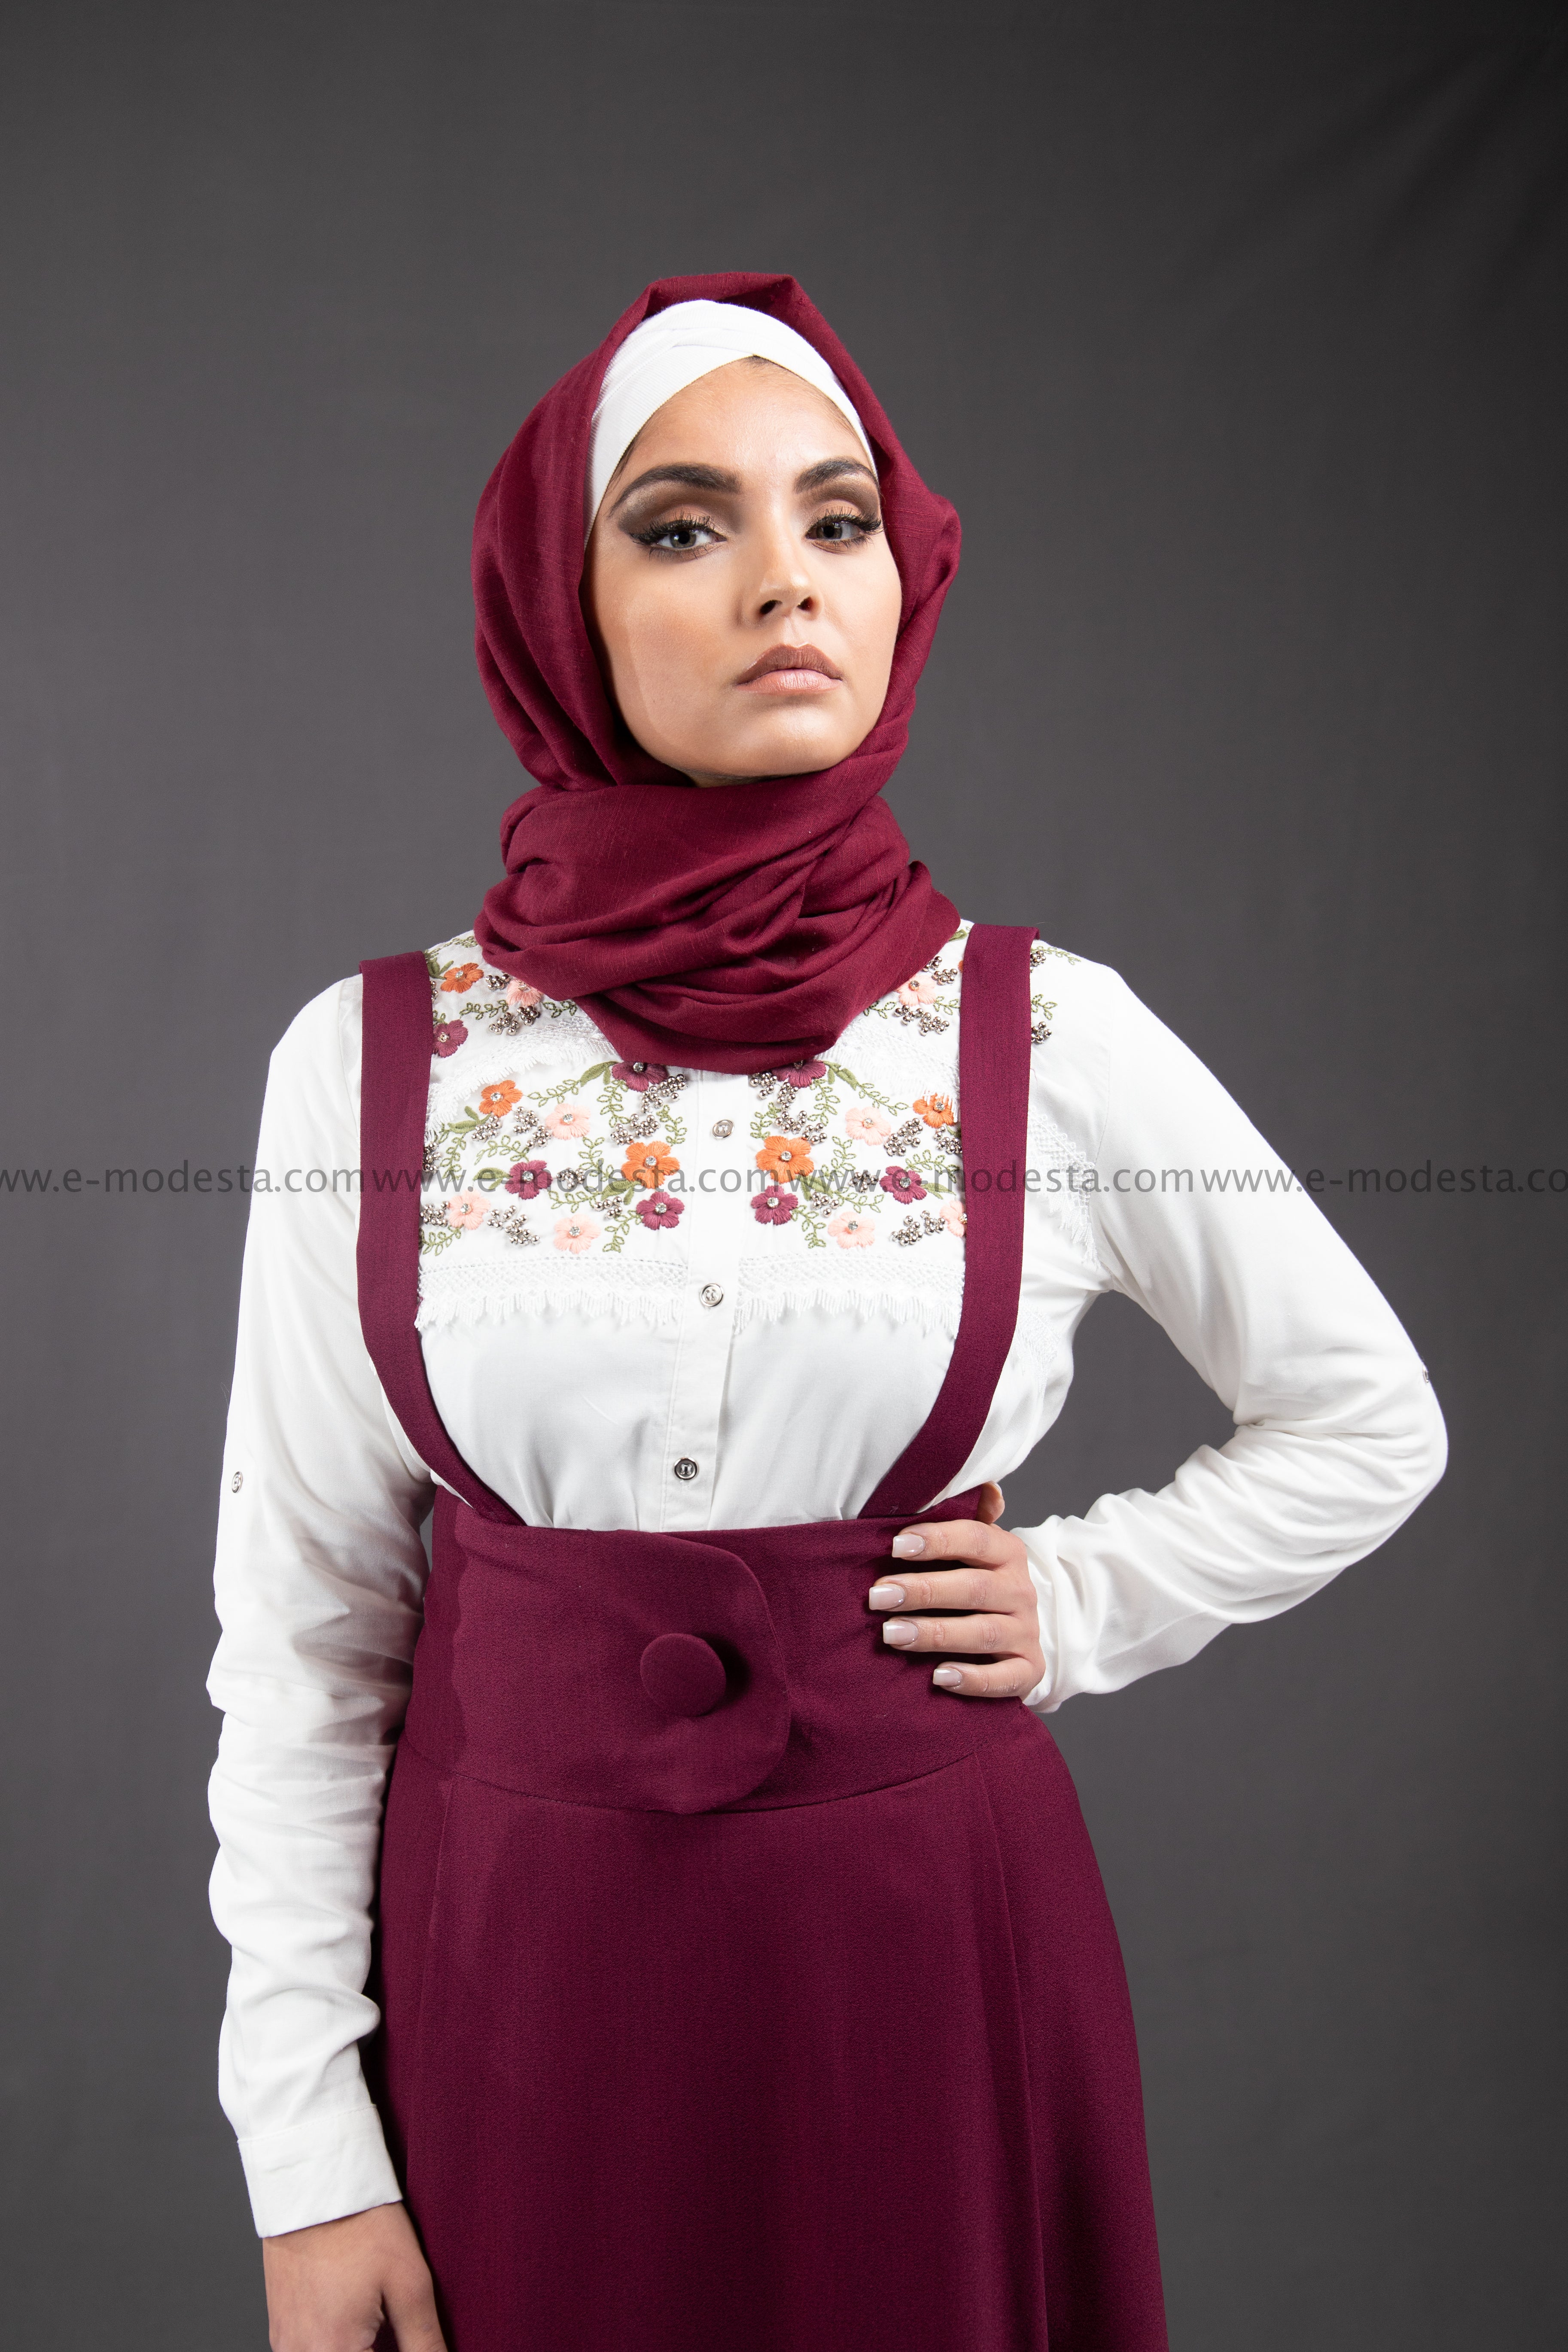 SALE Summer White Shirt | Flowers Embroidery | Purple and Pink - E-Modesta